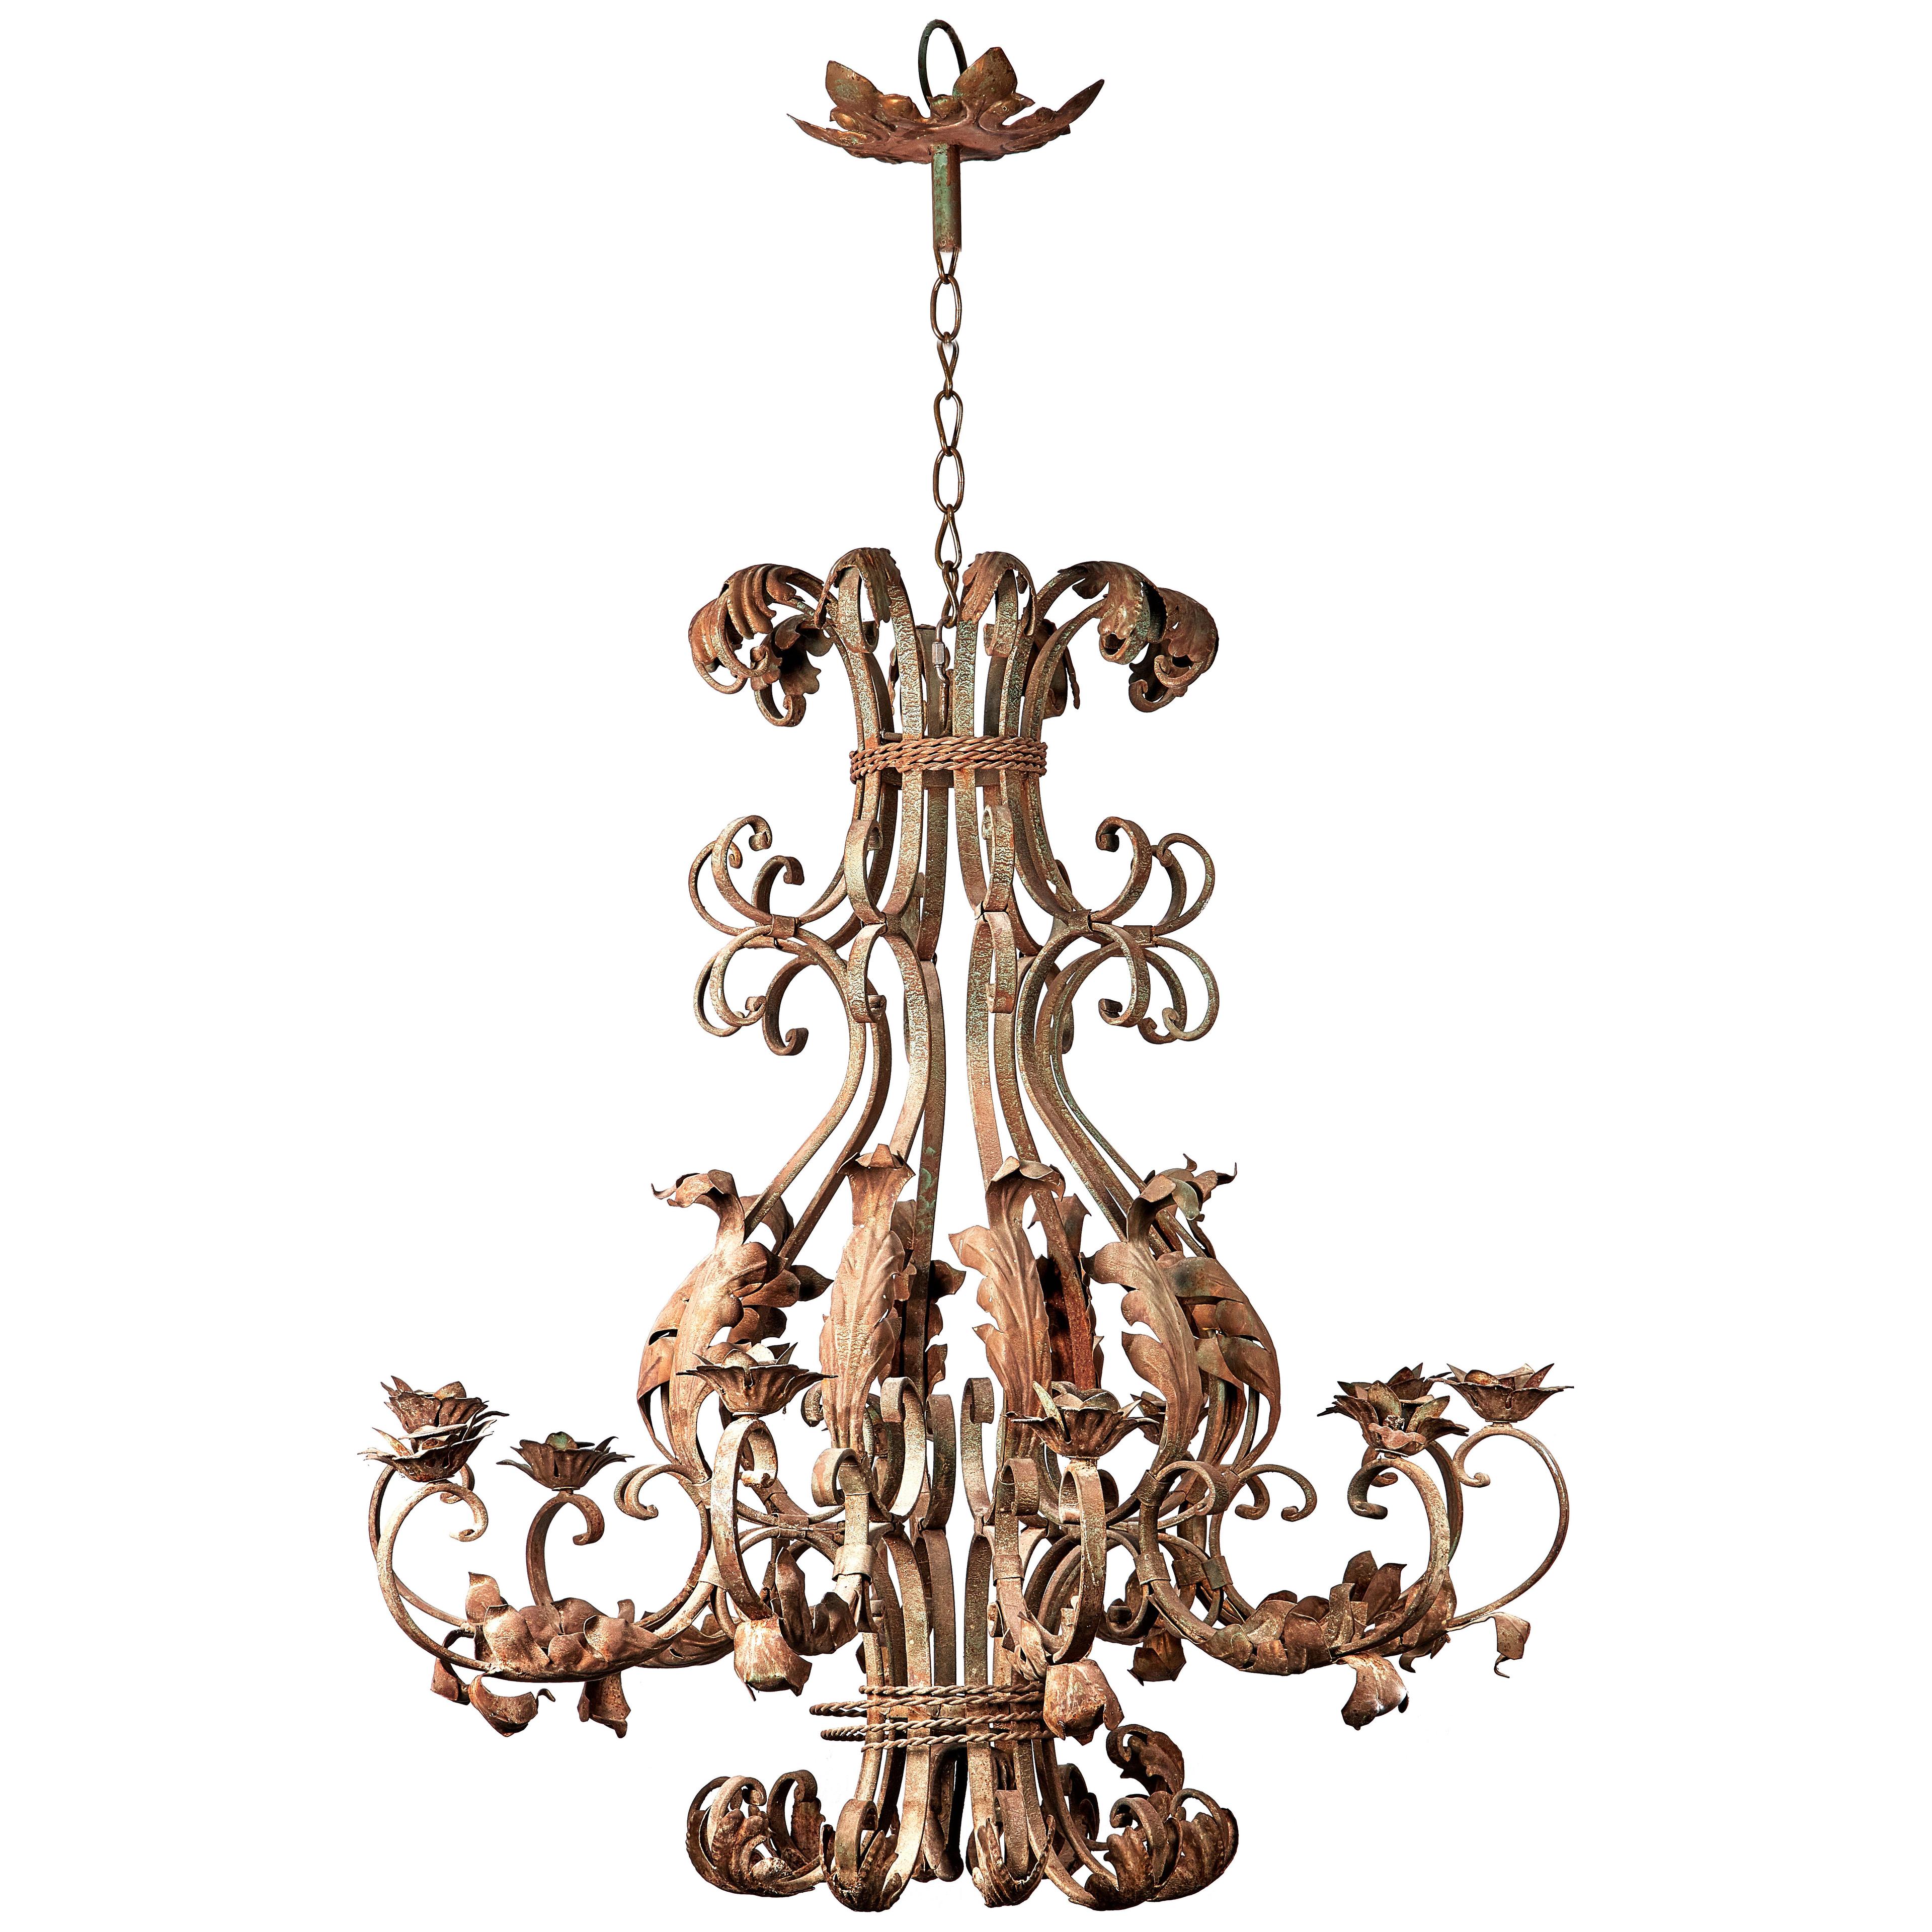 Rare extra large ornate ten branch iron chandelier